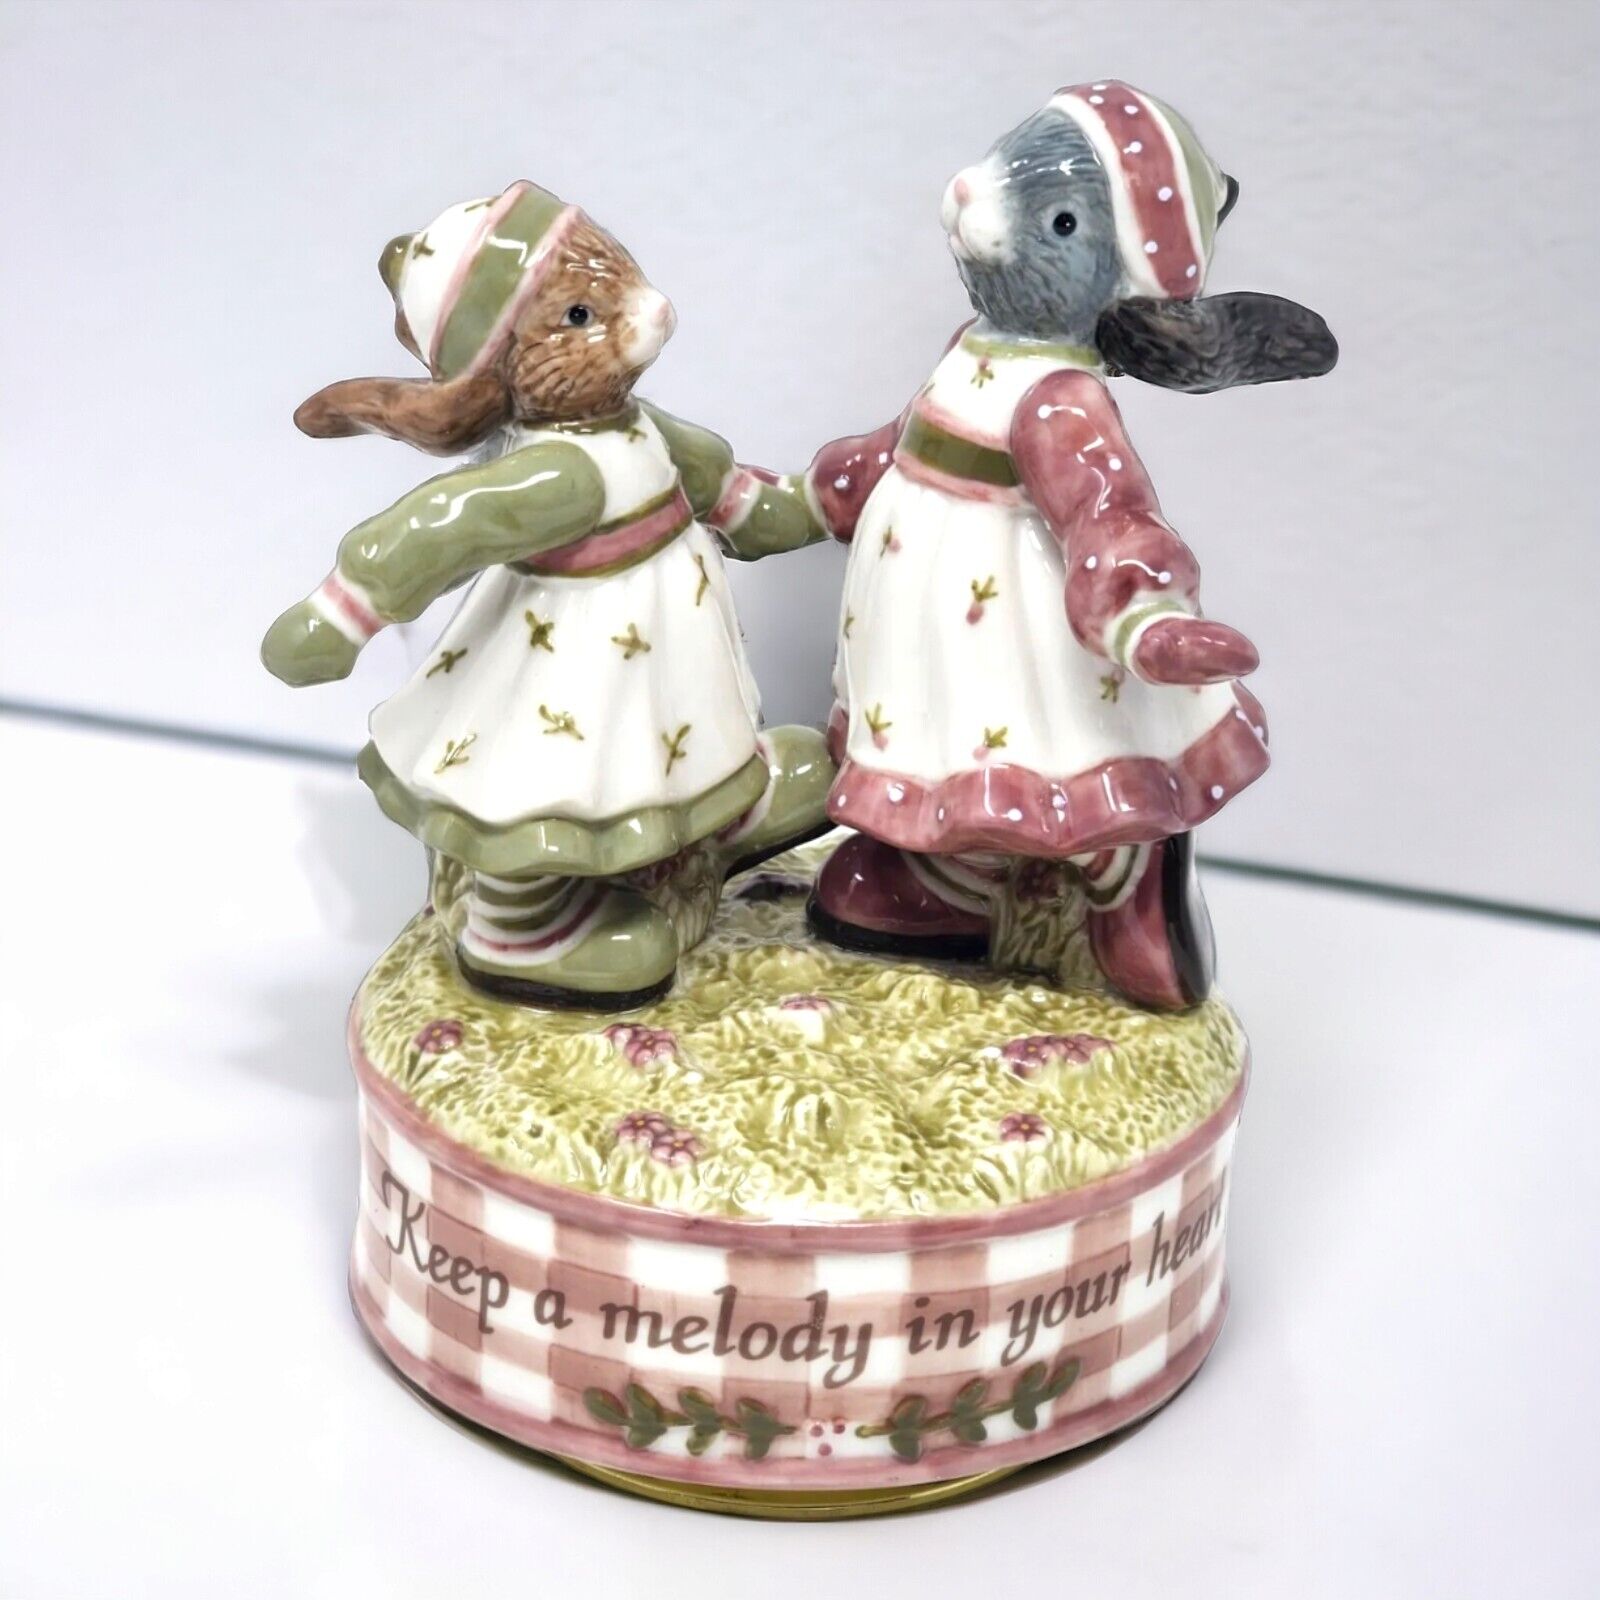 Demdaco Musical Bunnies Woodsong Kids Keep A Melody In Your Heart Ceramic